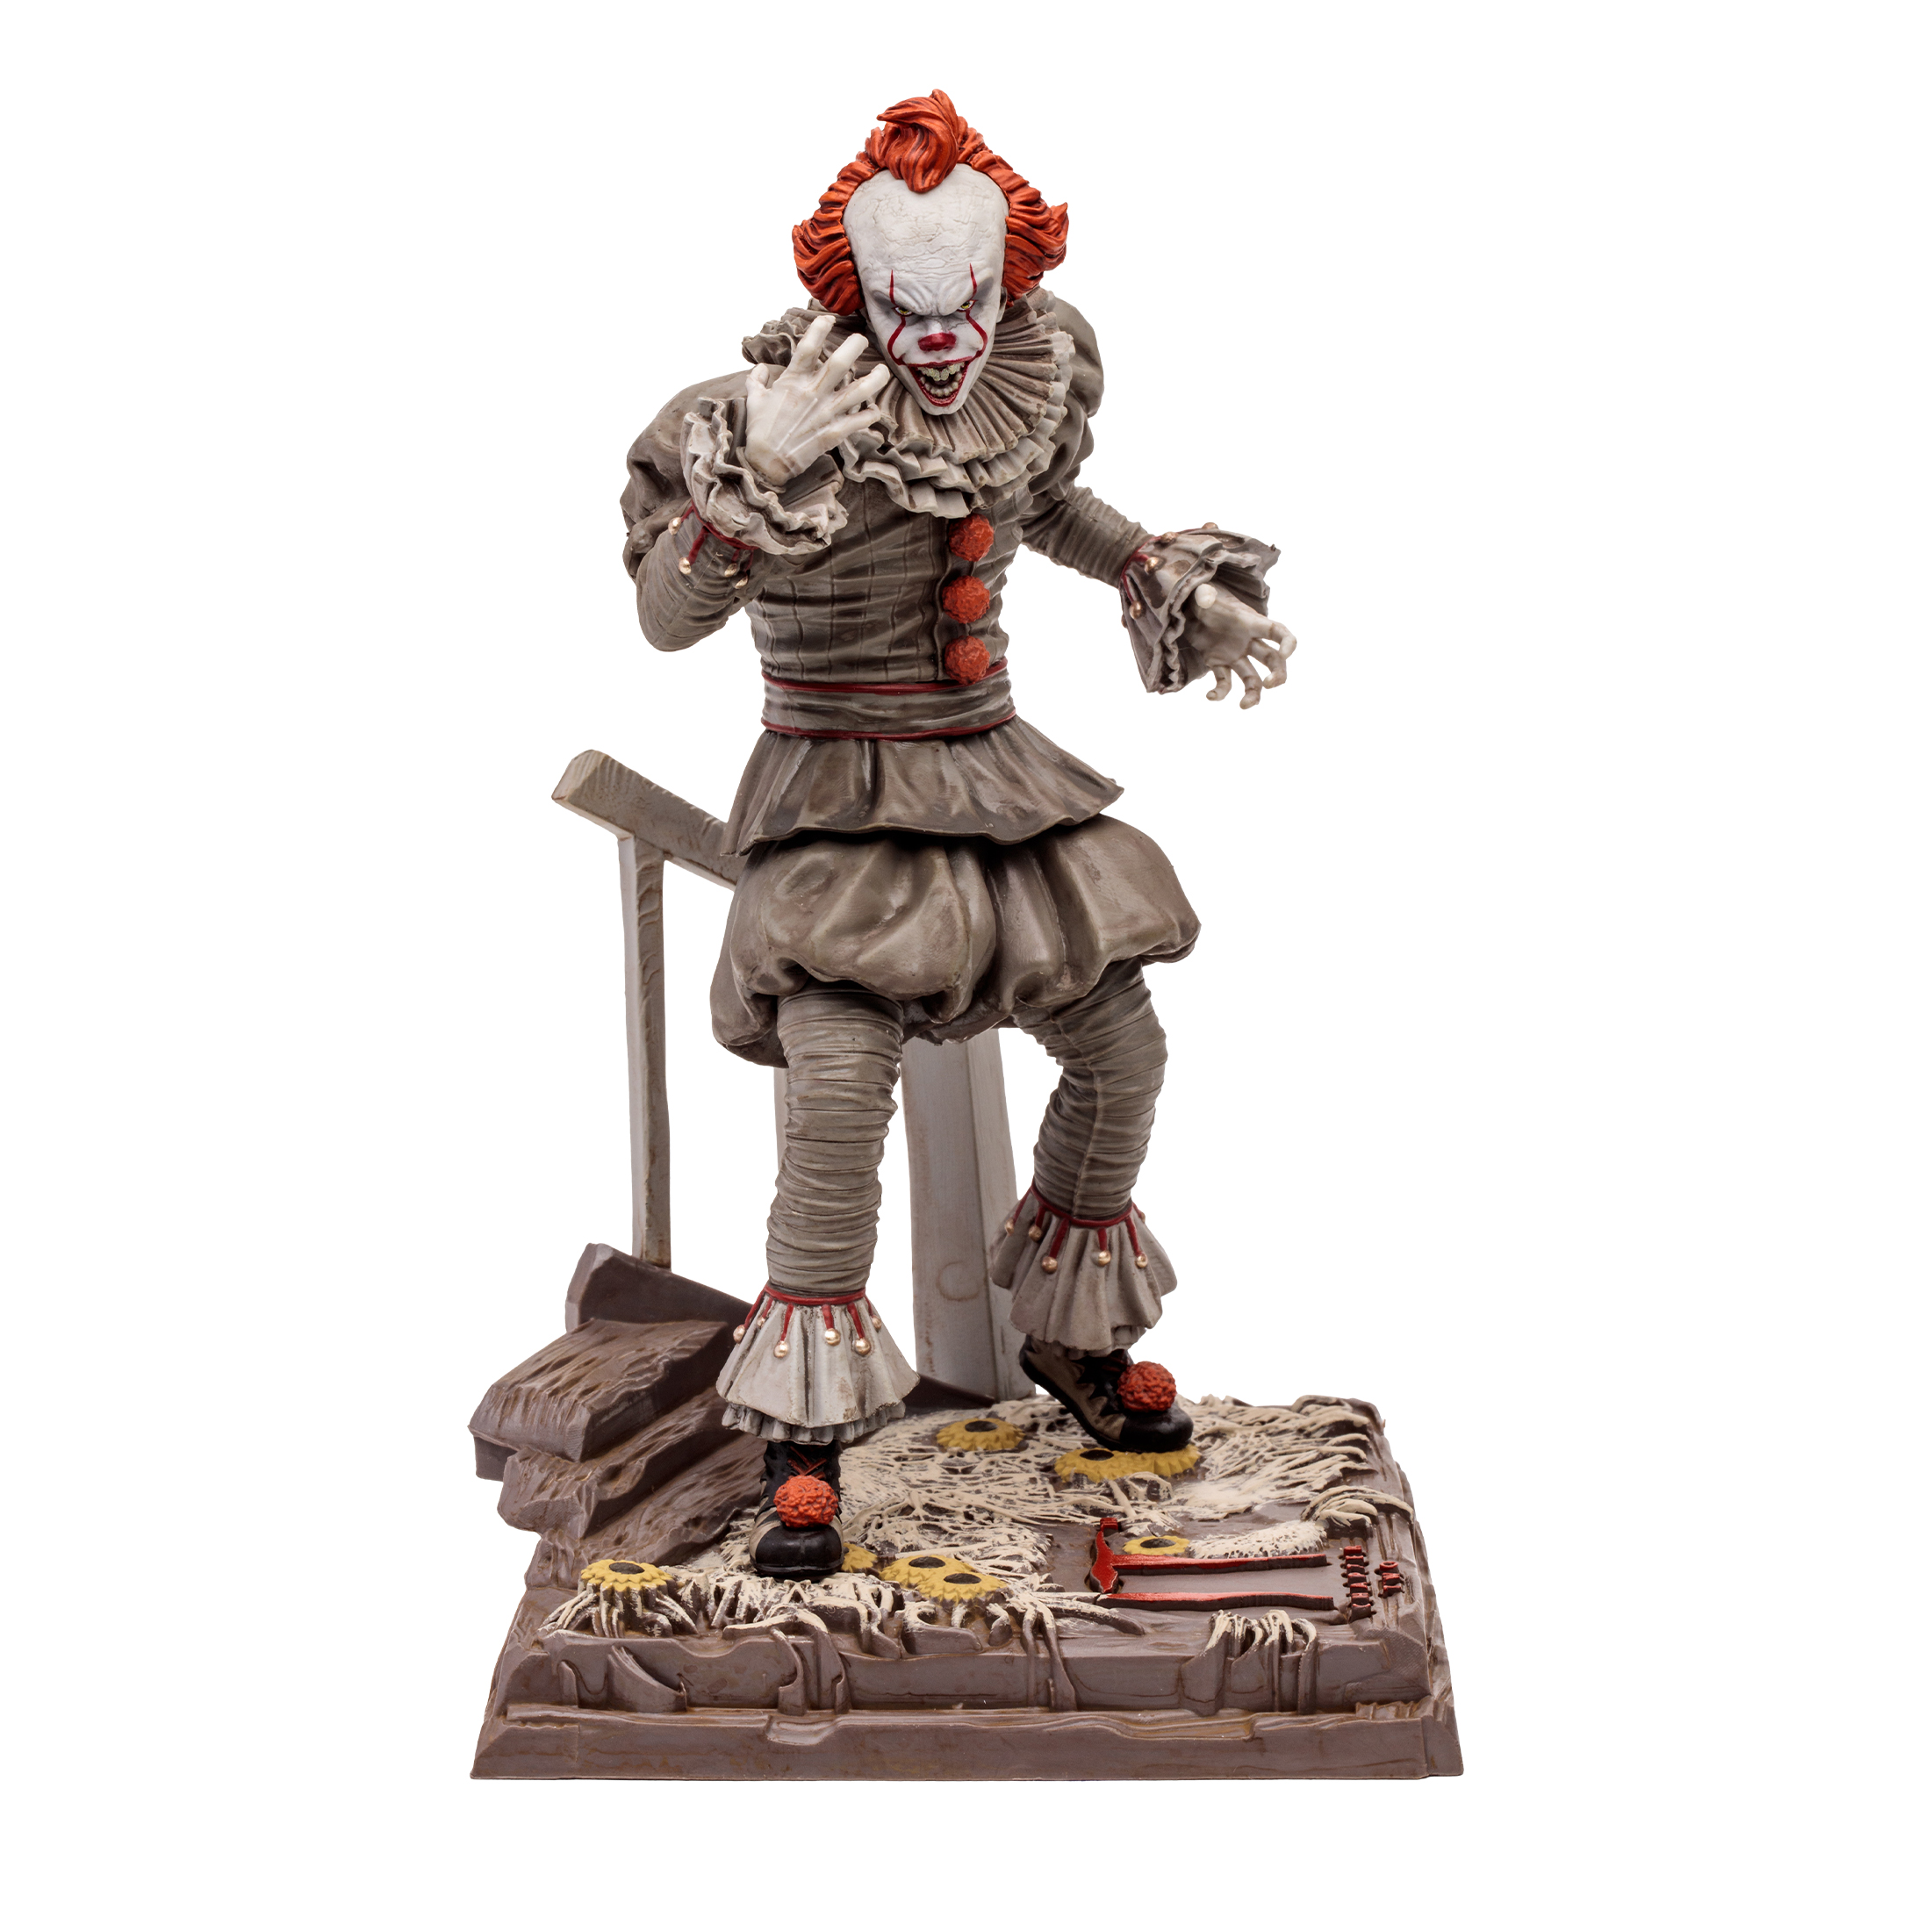 McFarlane Toys: Movie Maniacs 6" Posed Pennywise  